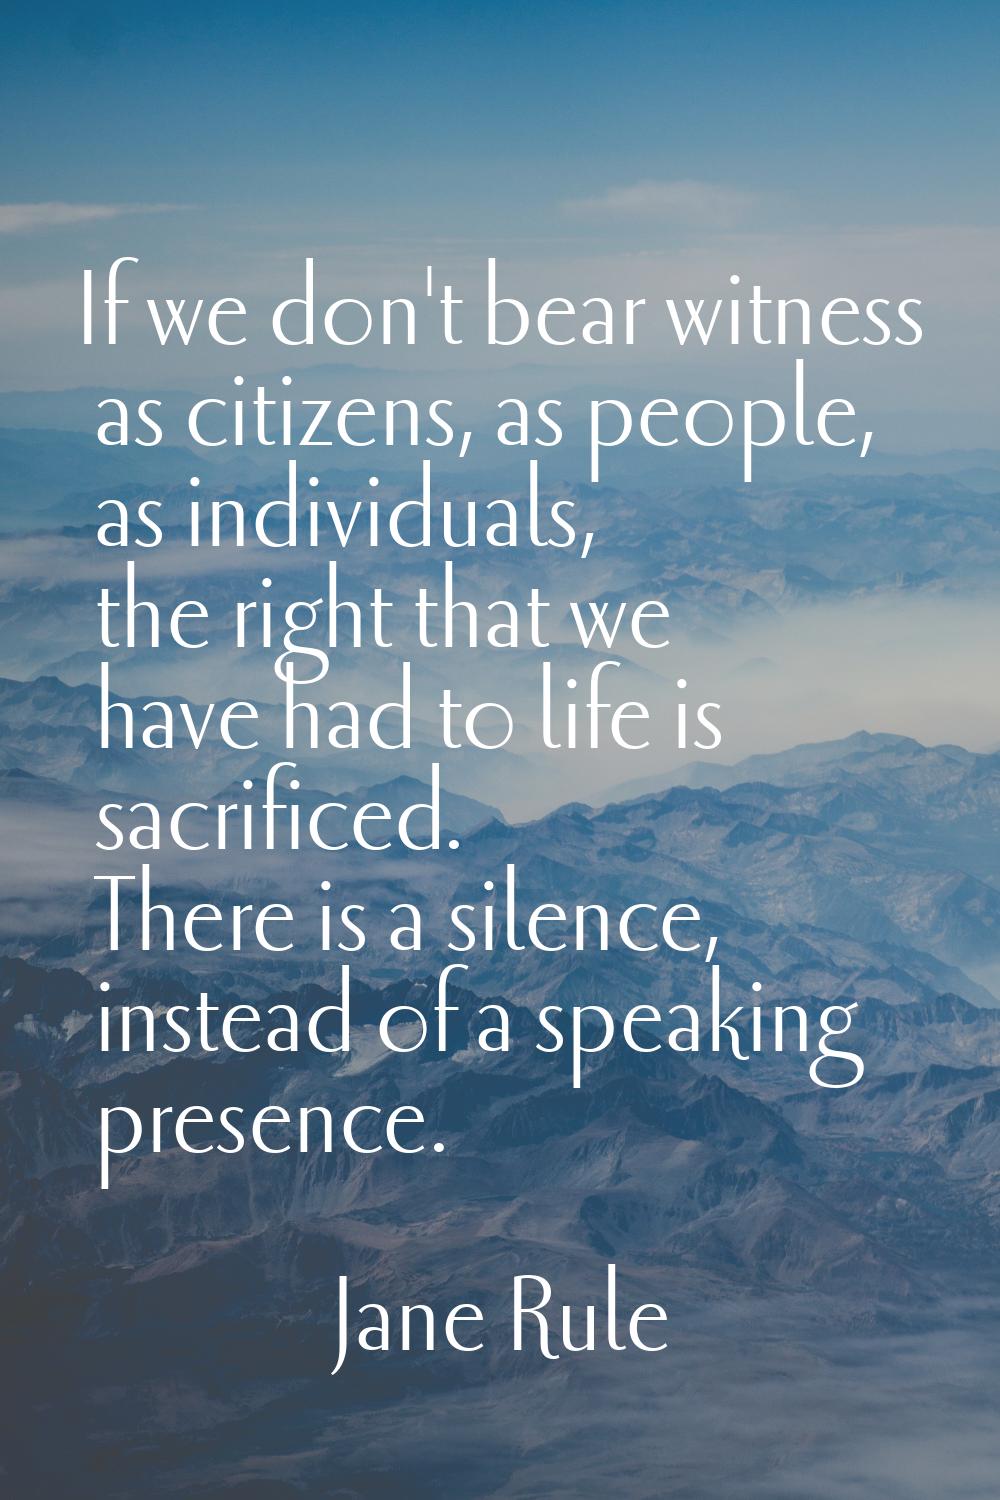 If we don't bear witness as citizens, as people, as individuals, the right that we have had to life